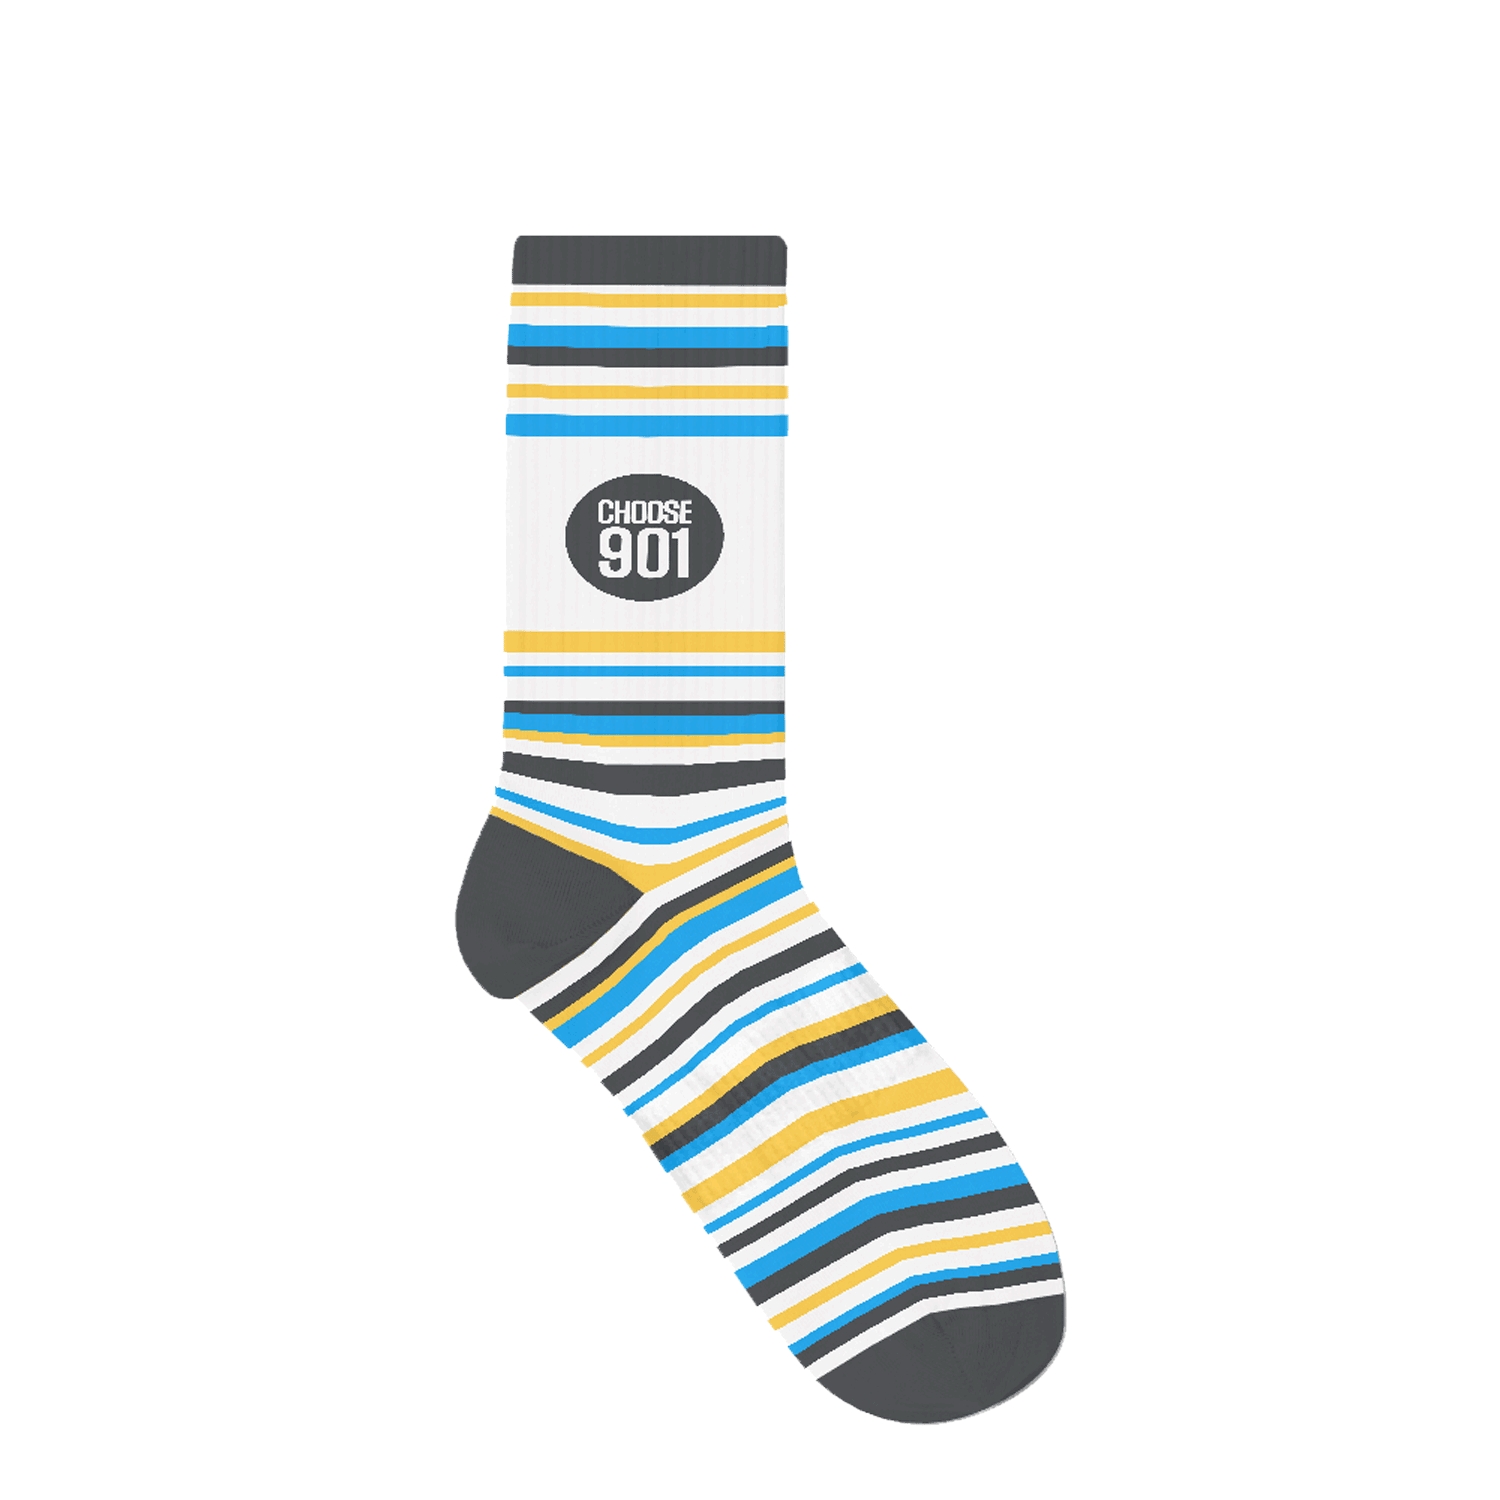 A Choose901 striped sock with a label that reads "Choose901 Memphis.